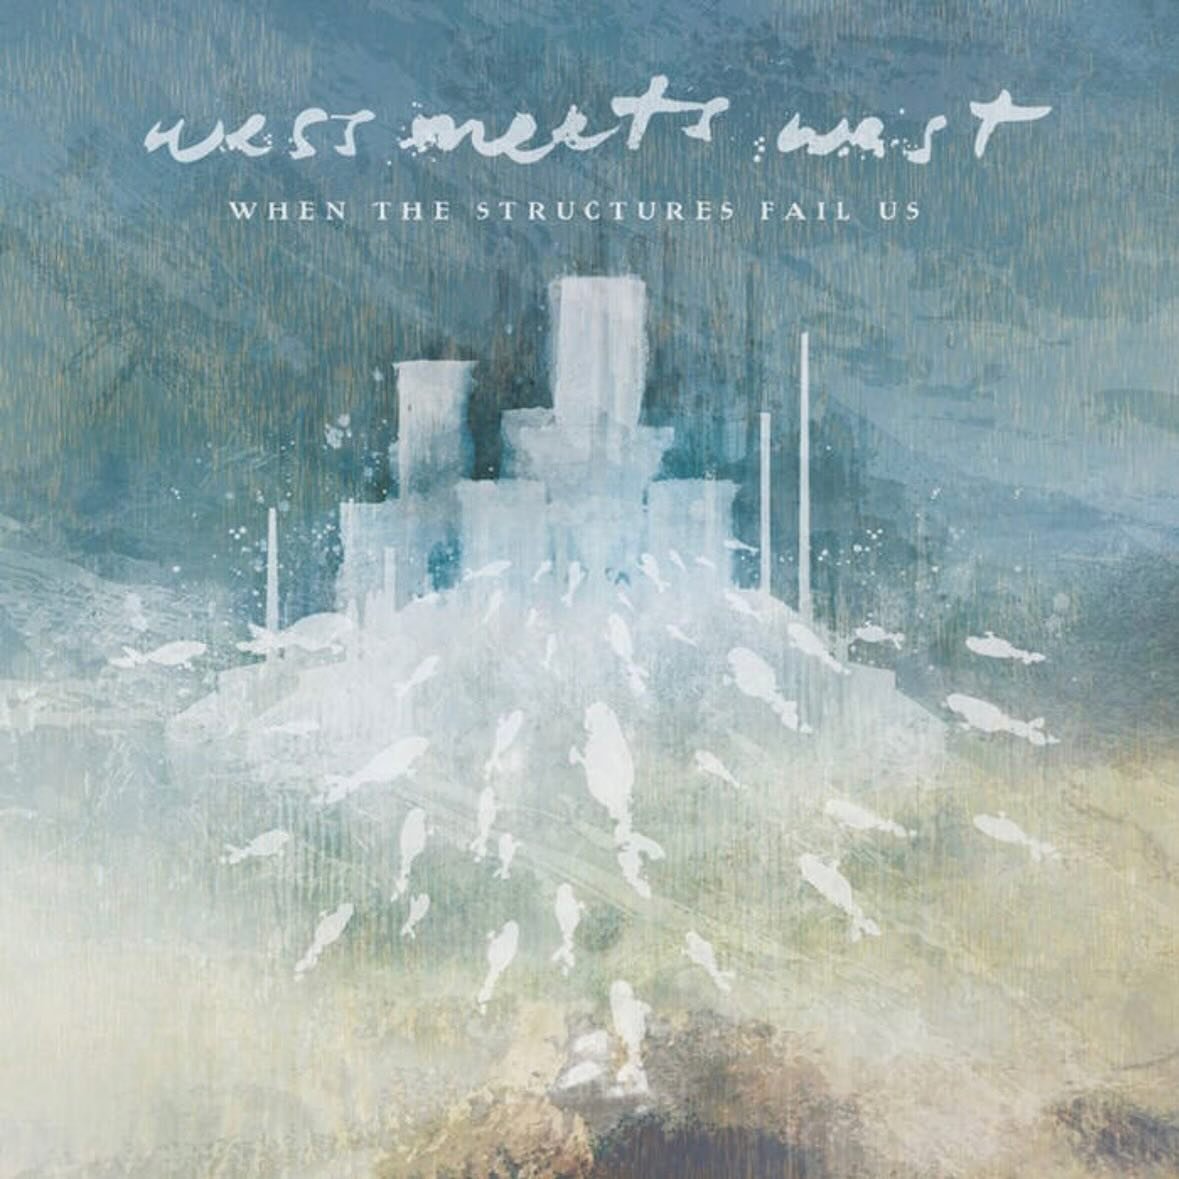 Tens years ago today we released our second album, When The Structure&rsquo;s Fails Us. We are planning some exciting ways to celebrate this later in the fall!